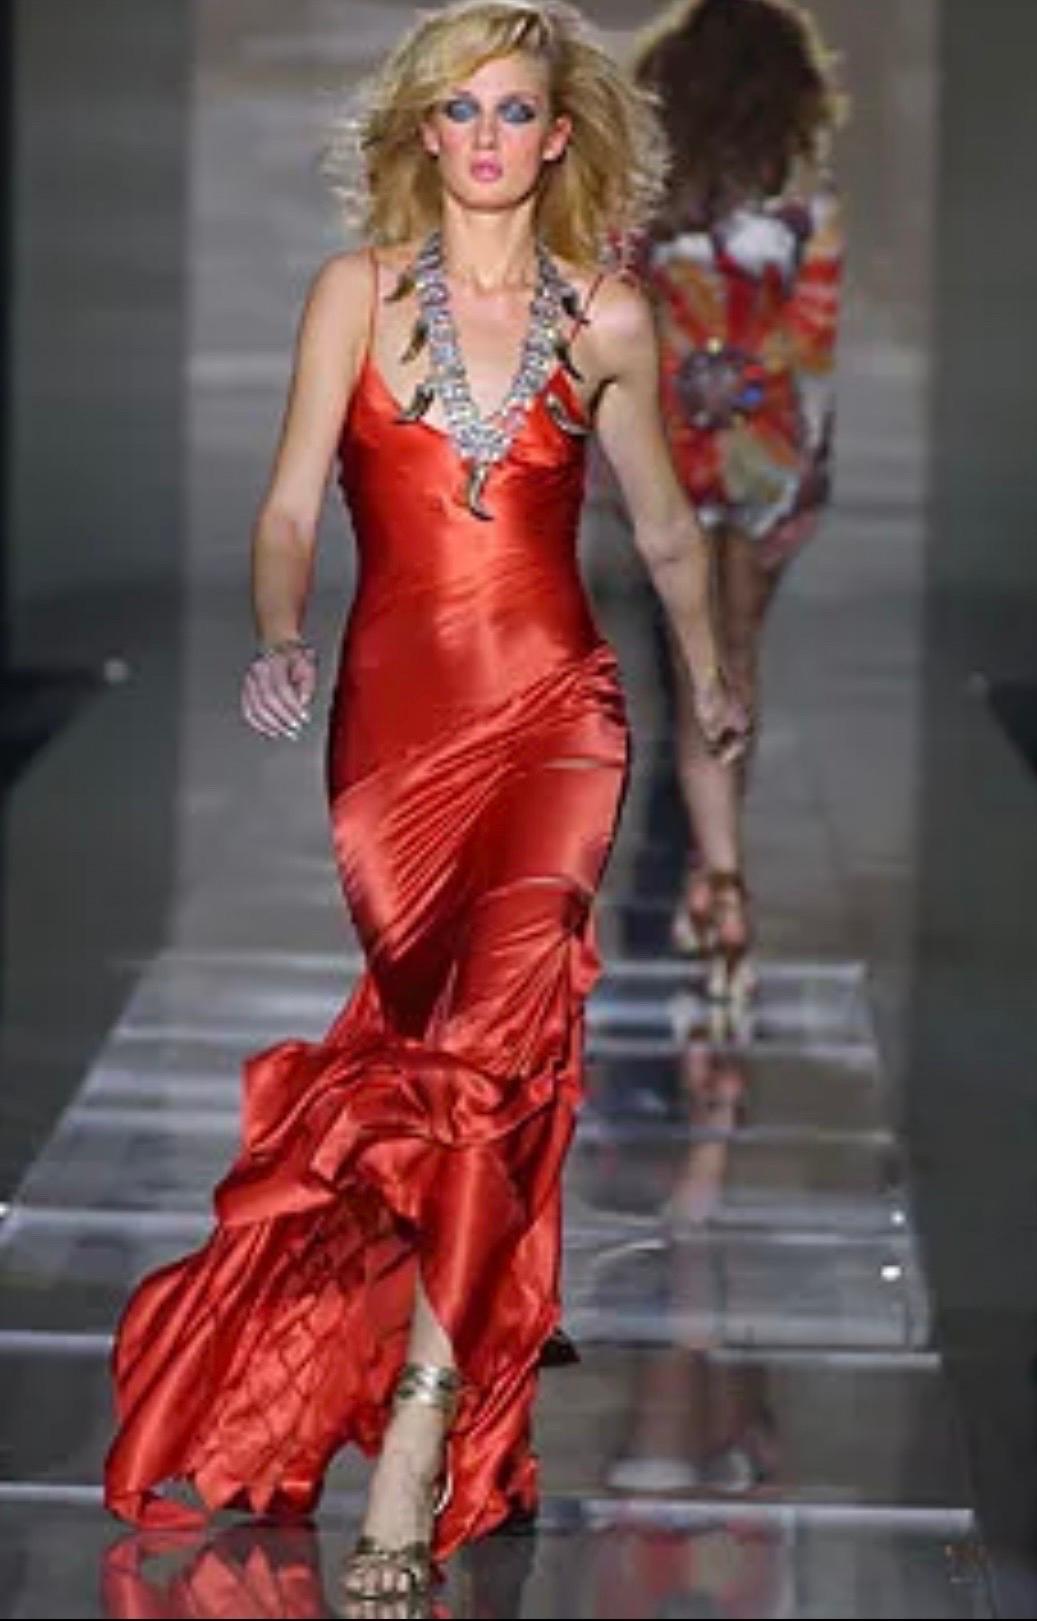 S/S 2004 Roberto Cavalli Dress
Similar dress in red shown on the runway
Gorgeous green silk fabric
Thin shoulder straps
V neckline
Bias cut
Fitted bodice with flared full hem
Cut out details on lower half of dress
Unlined
Slips on overhead

Marked